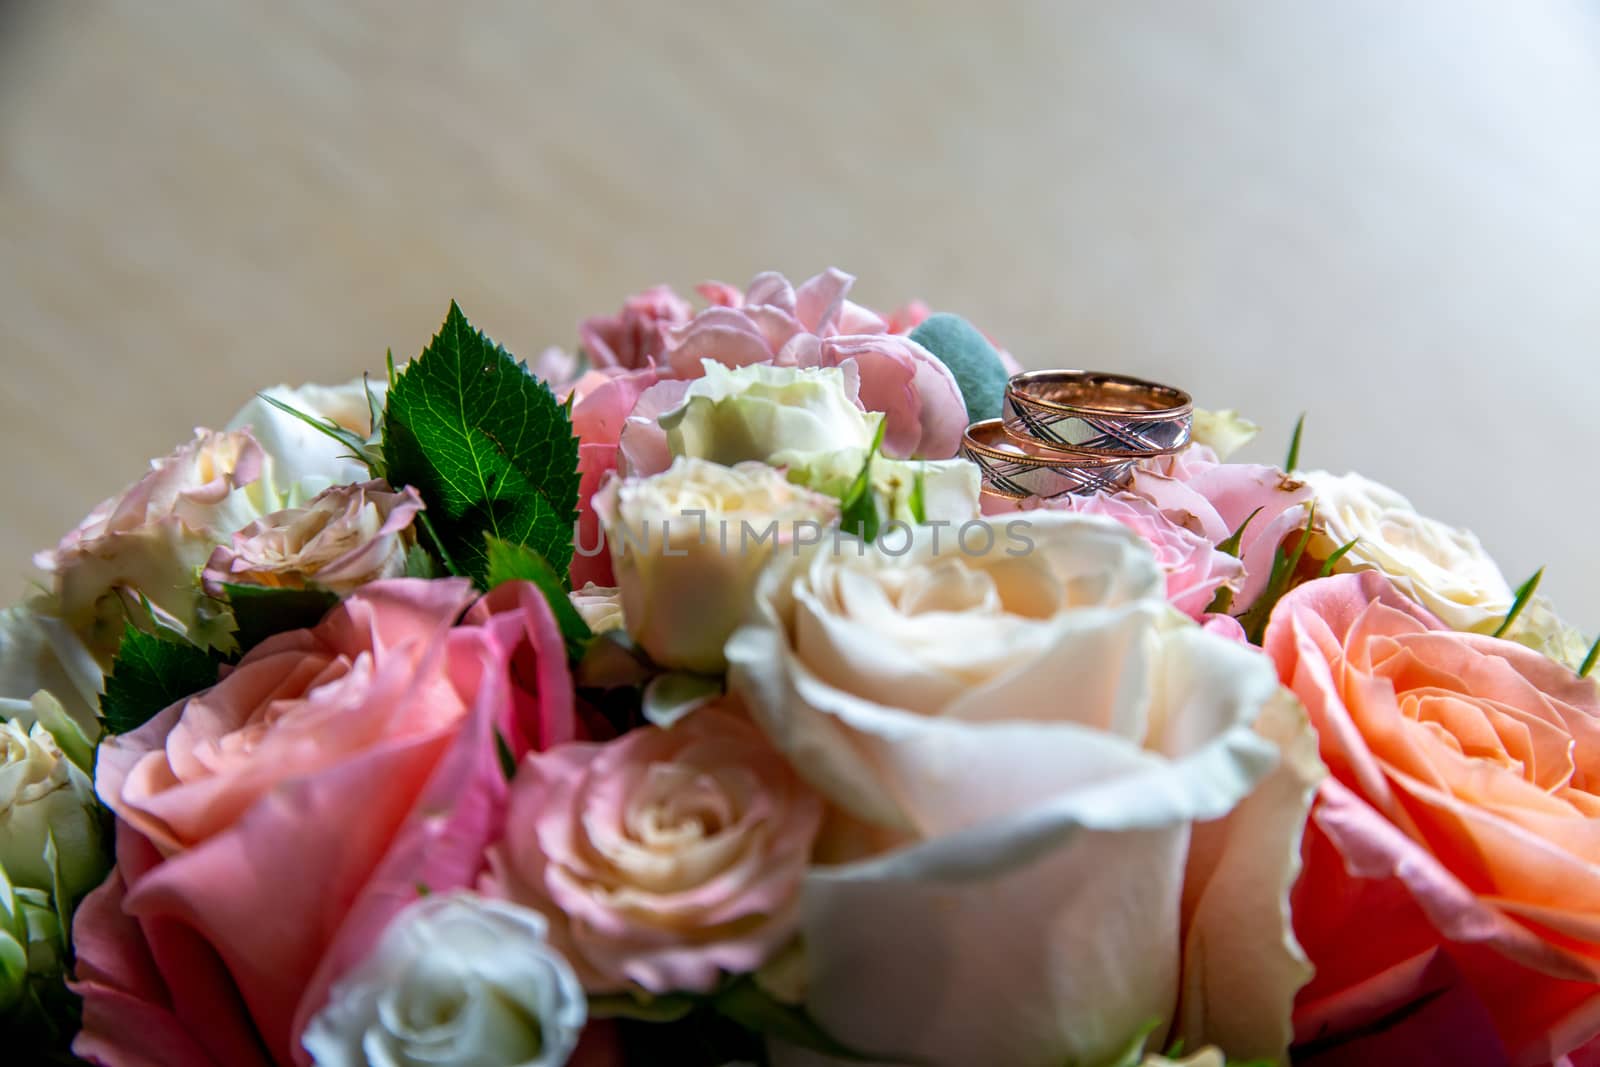 Bouquet of bride with roses and gold wedding rings. by fotorobs